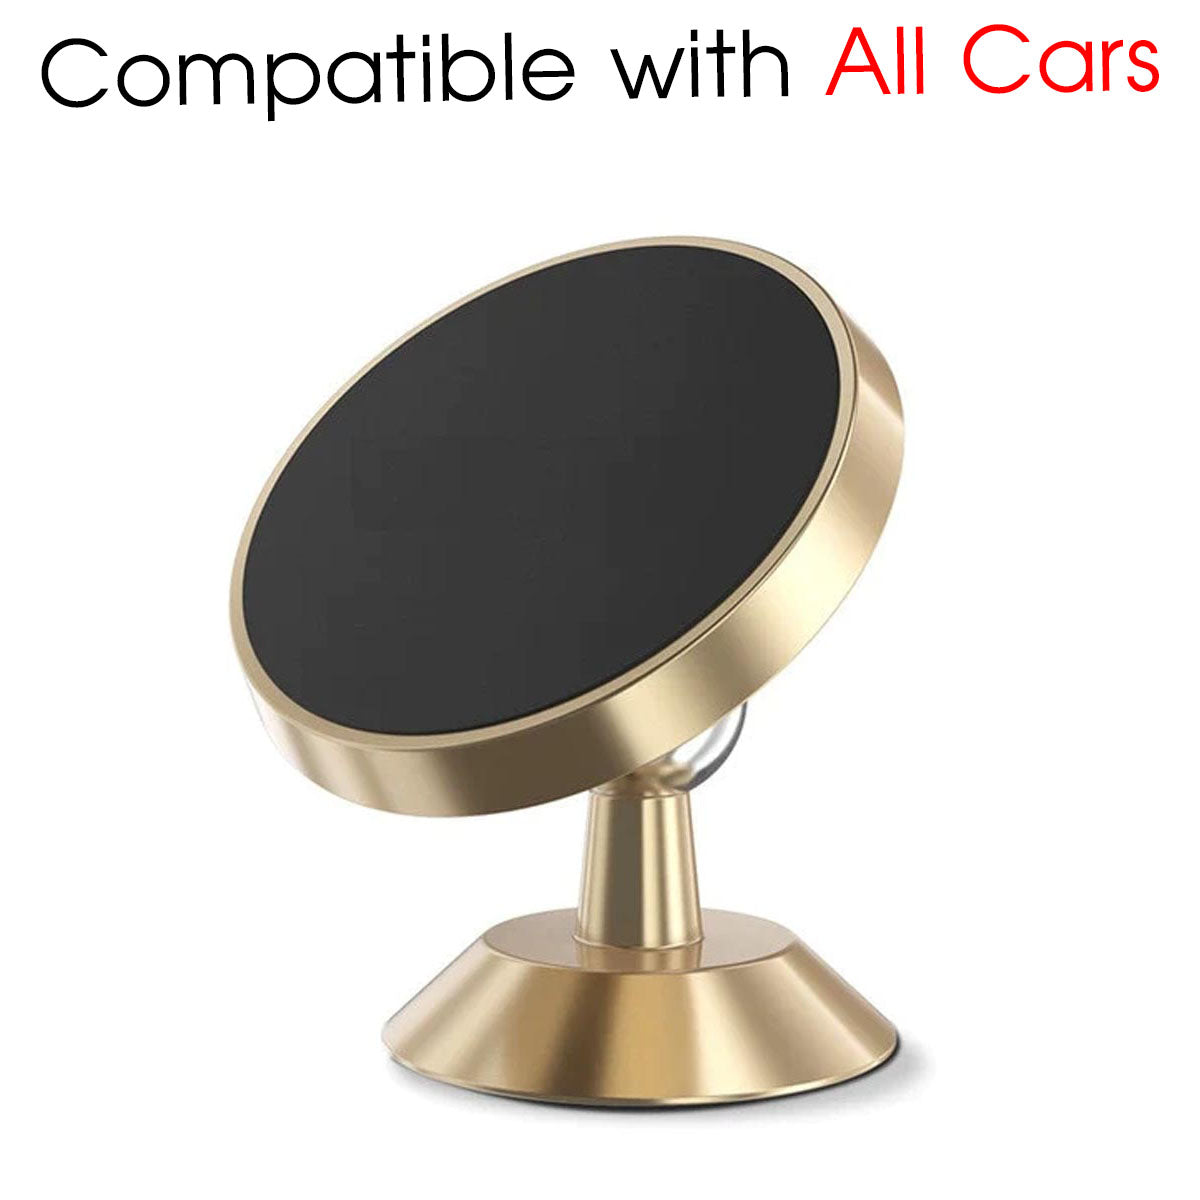 [2 Pack ] Magnetic Phone Mount, Custom For Your Cars, [ Super Strong Magnet ] [ with 4 Metal Plate ] car Magnetic Phone Holder, [ 360° Rotation ] Universal Dashboard car Mount Fits All Cell Phones, Car Accessories JG13982